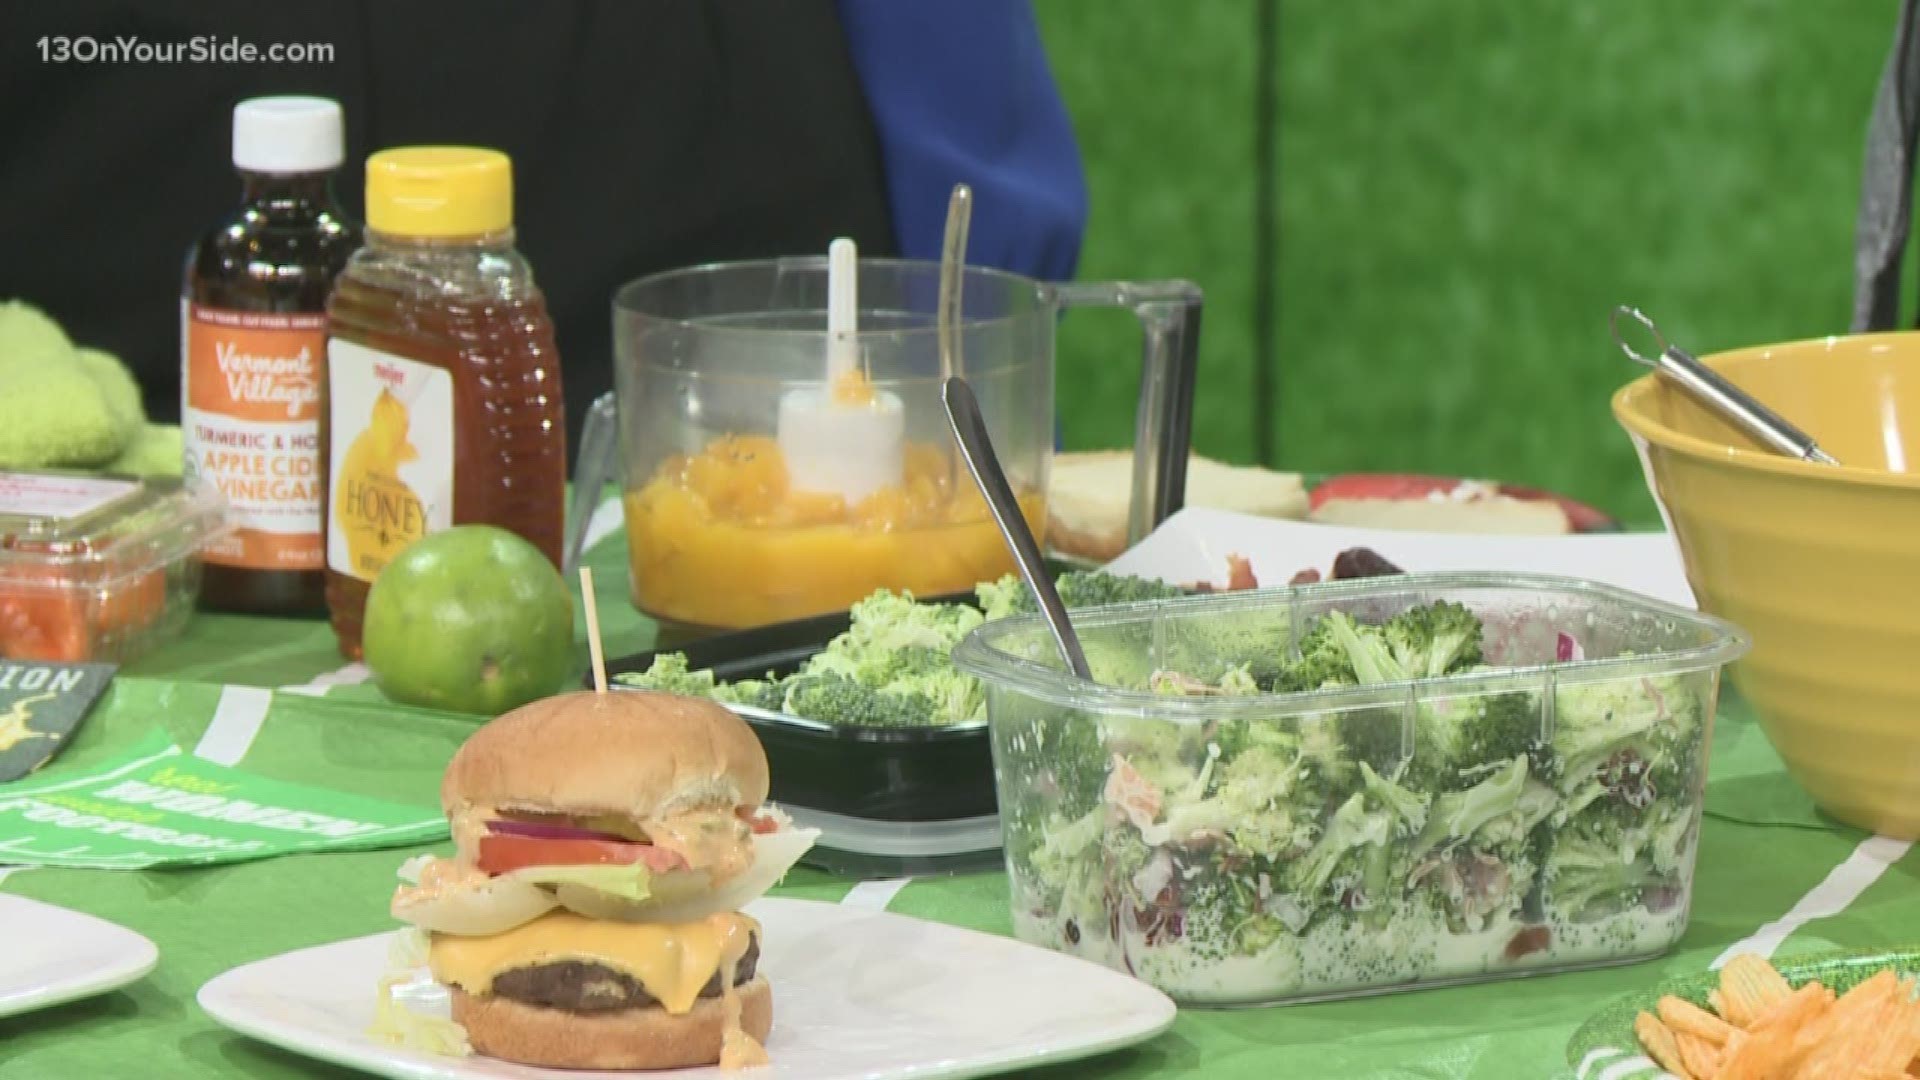 Gina's got some unique sliders to spice up your tailgating party.